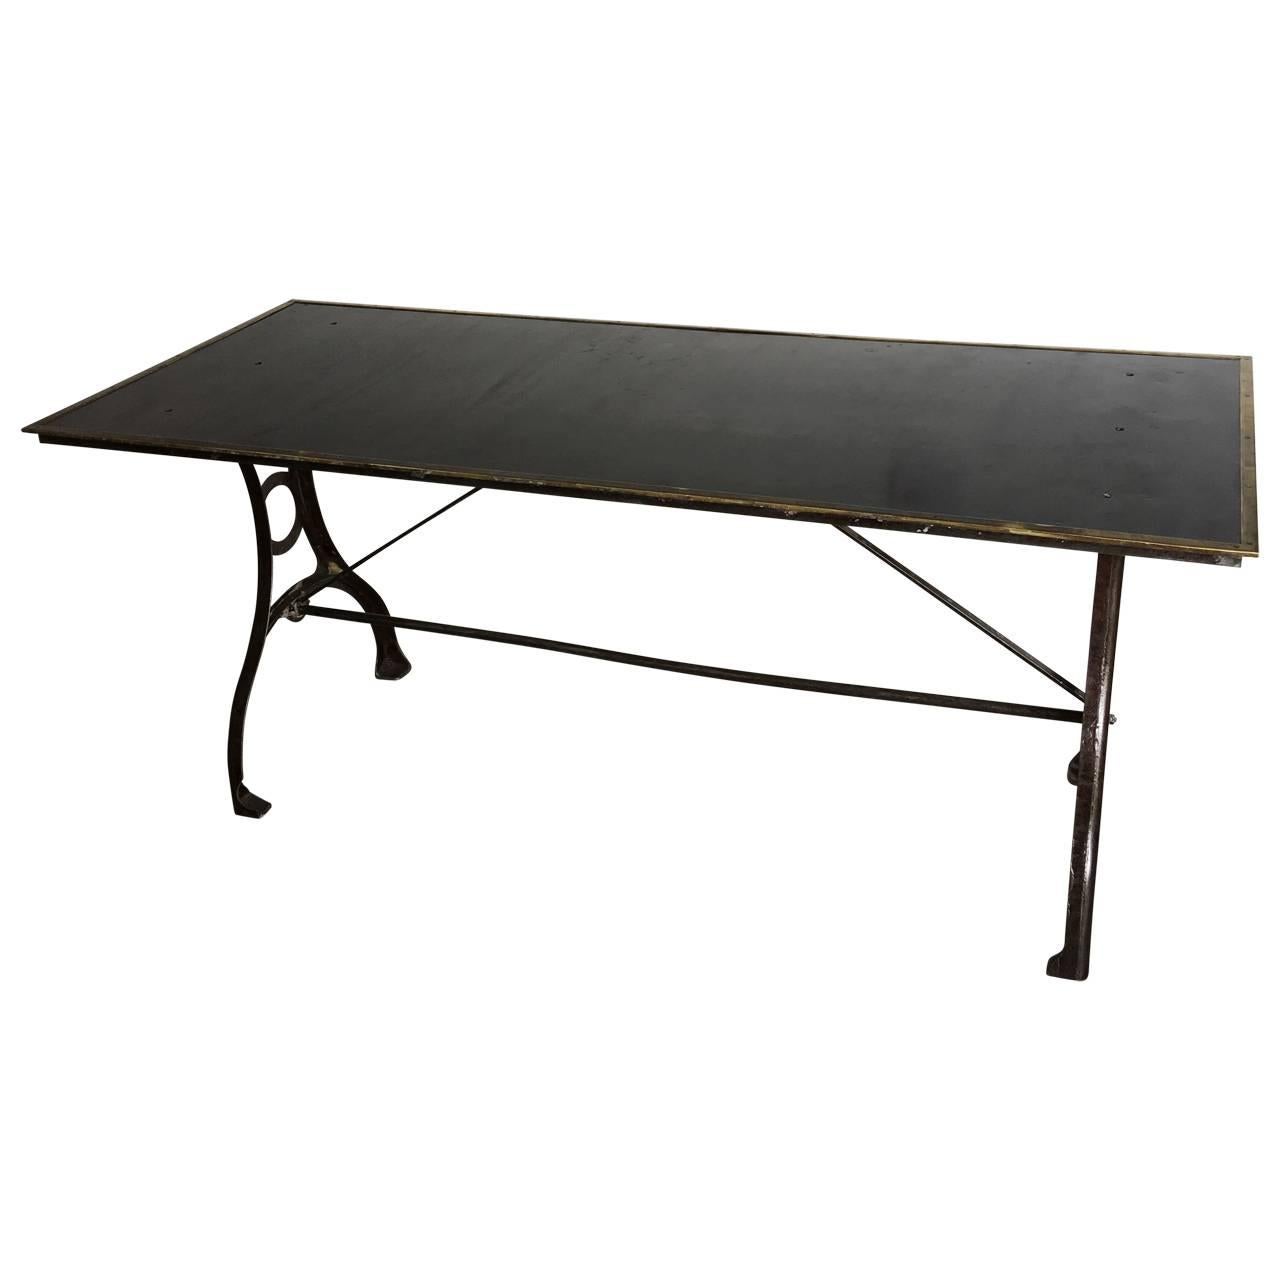 Early Industrial Table From The National Geographic Society 3